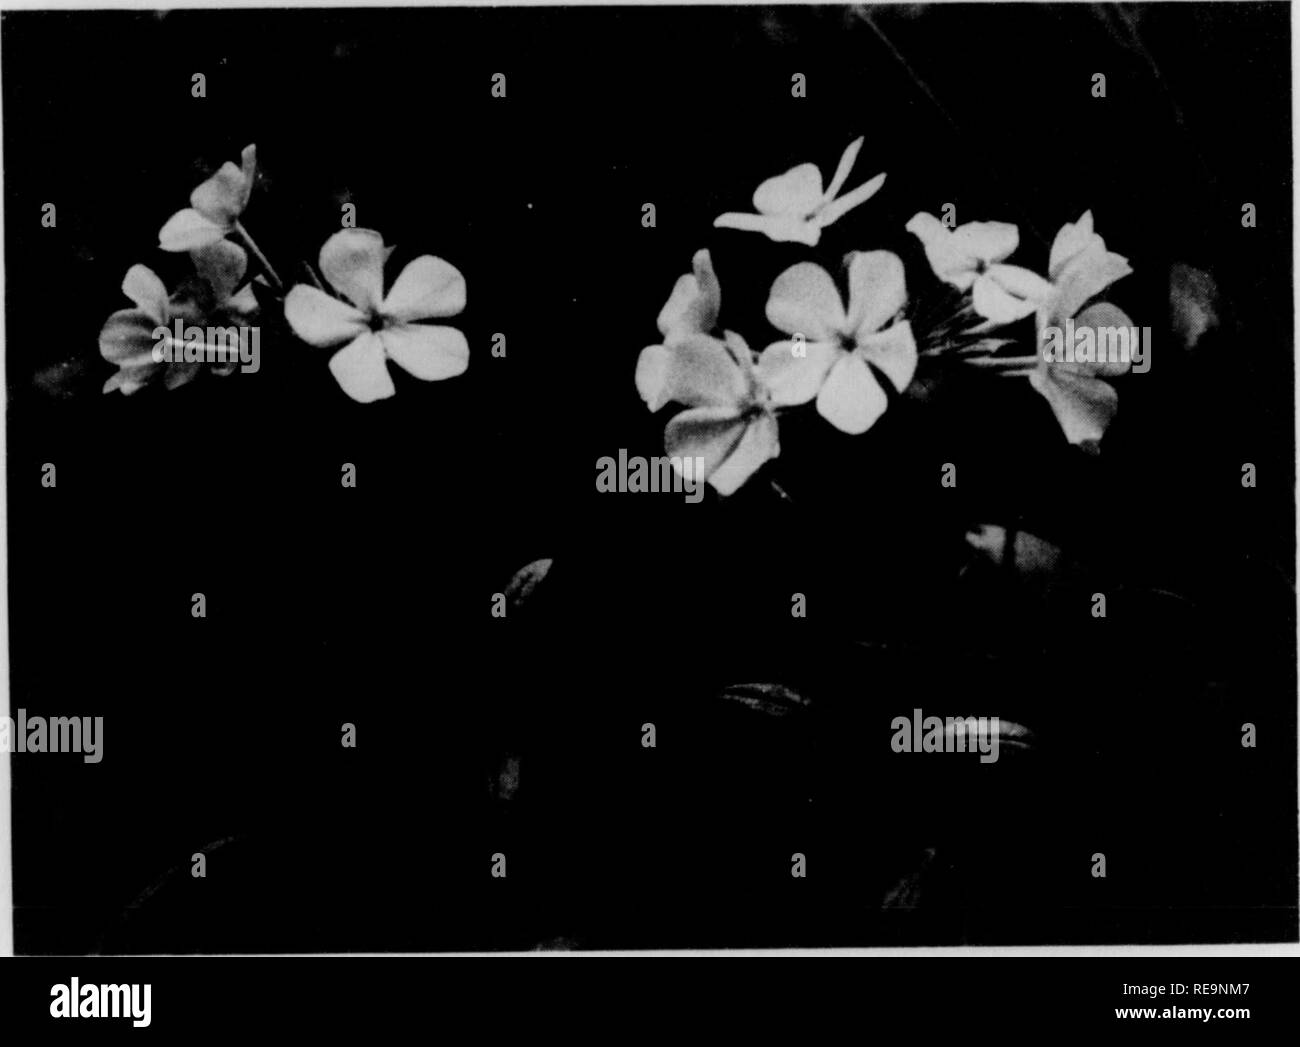 . Contributions from the Botanical Laboratory, vol. 8. Botany; Botany. Fig. 1. Phlox amocna waiteri. Six miles north of Jeniison, Chilton County, Alabama.. f.^&gt; &gt;i Fig. 2. Phlox amocna valtcri. In cultivation; originally from North Carolina. 7. Phlox amoena Sims. Hairy Phlox. Plate 3. History.—This species is recorded to have been discovered by Fraser in 1786, but it was not named until 24 years later. Meanwhile Walter^ had listed it with a question, and Michaux^ without question, as P. pUosa Linne. In 1810 Sims^ pub- lished a colored plate of it and ventured to give the name now accepte Stock Photo